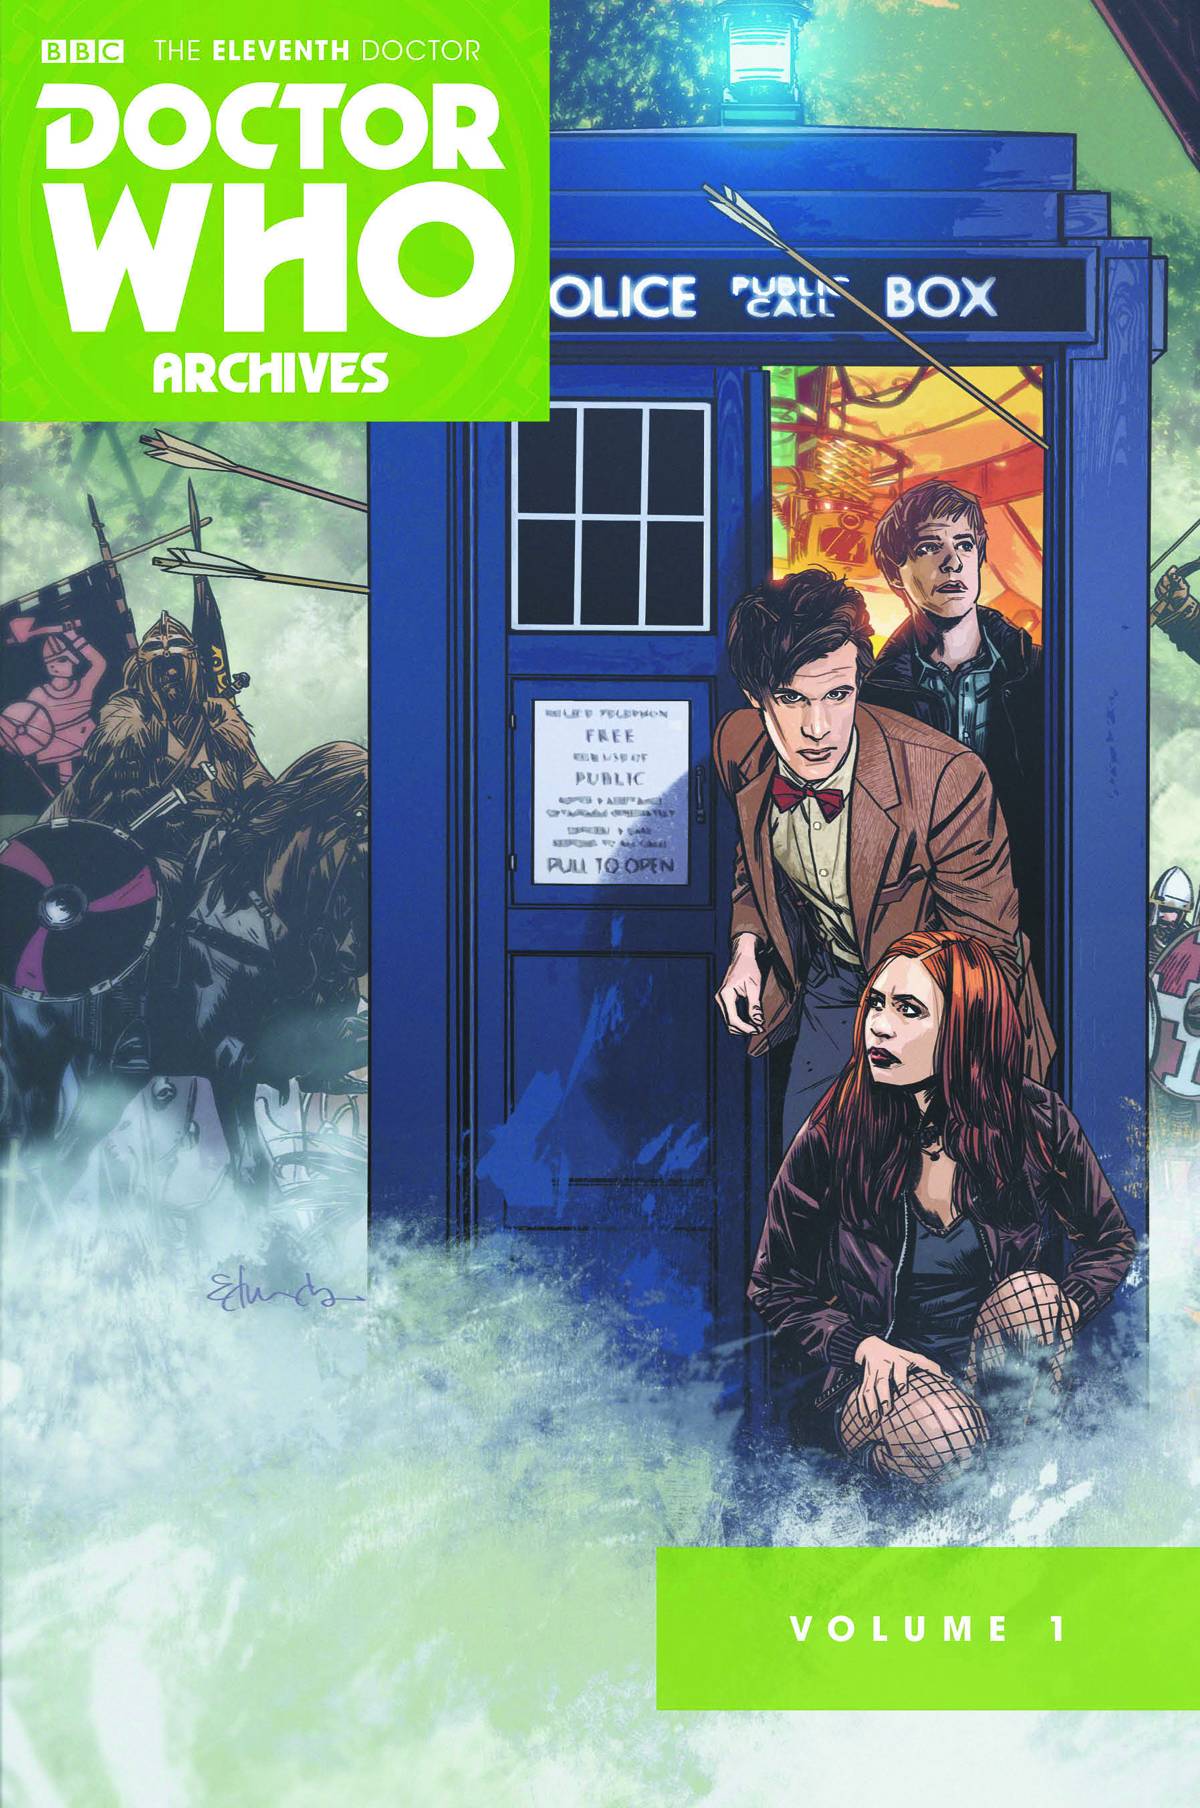 Doctor Who 11th Doctor Archives Omnibus Graphic Novel Volume 1